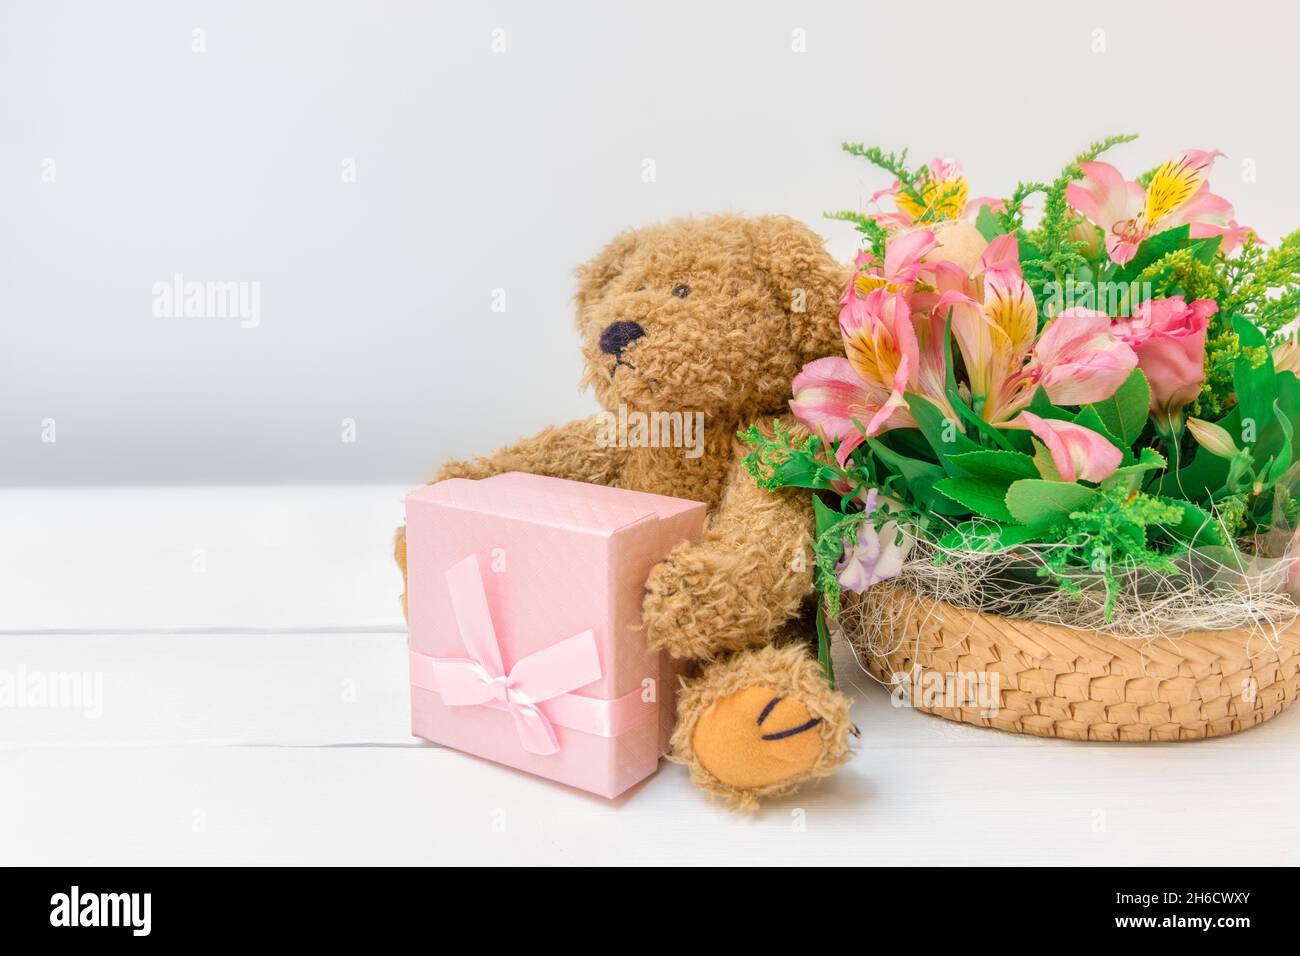 Cute festive background with flowers bouquet, teddy bear and present on white background with copy space Stock Photo